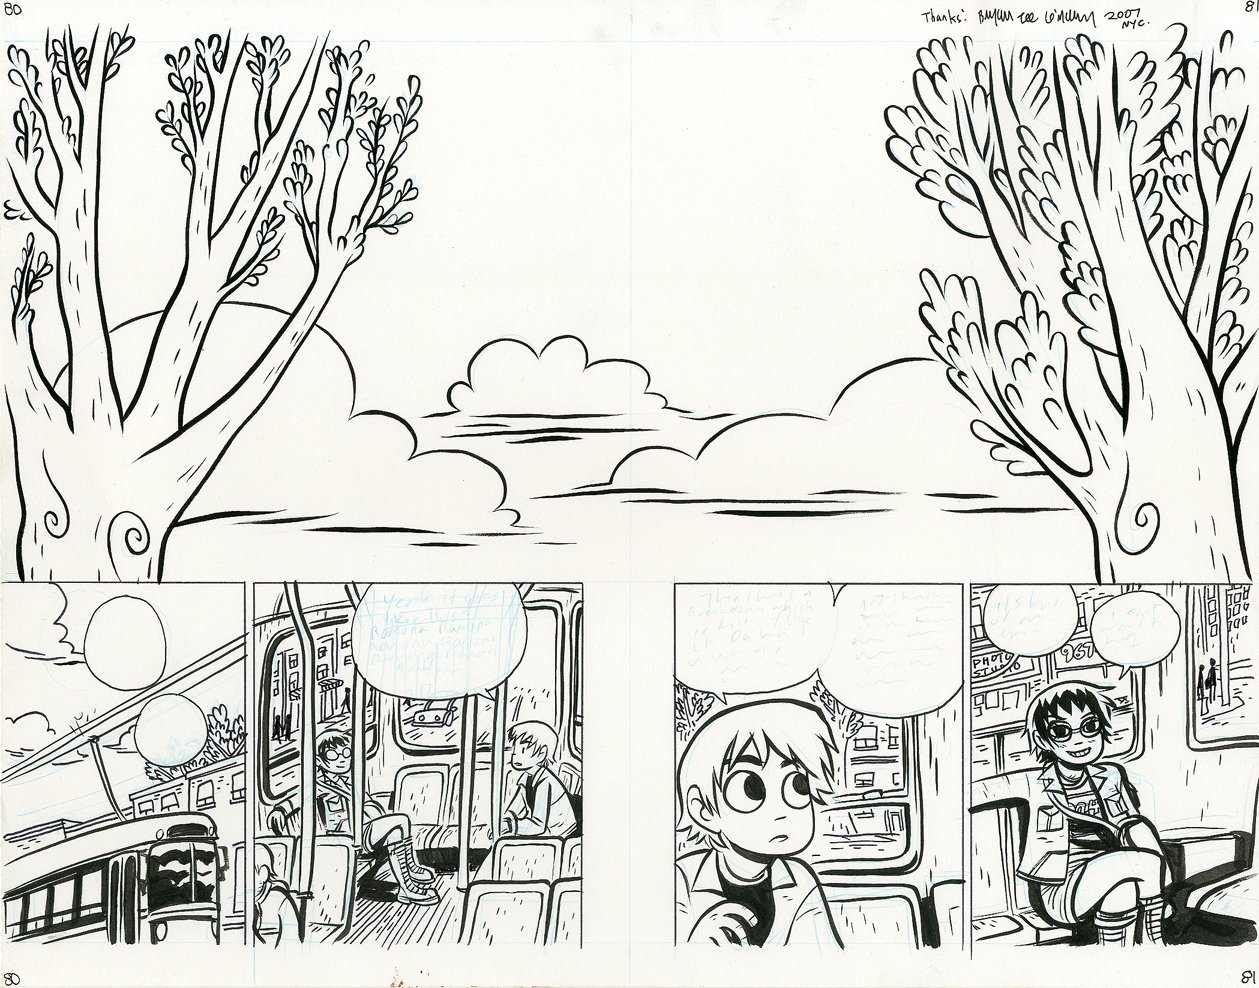 thebristolboard:  Original double-page spread by Bryan Lee O’Malley from Scott